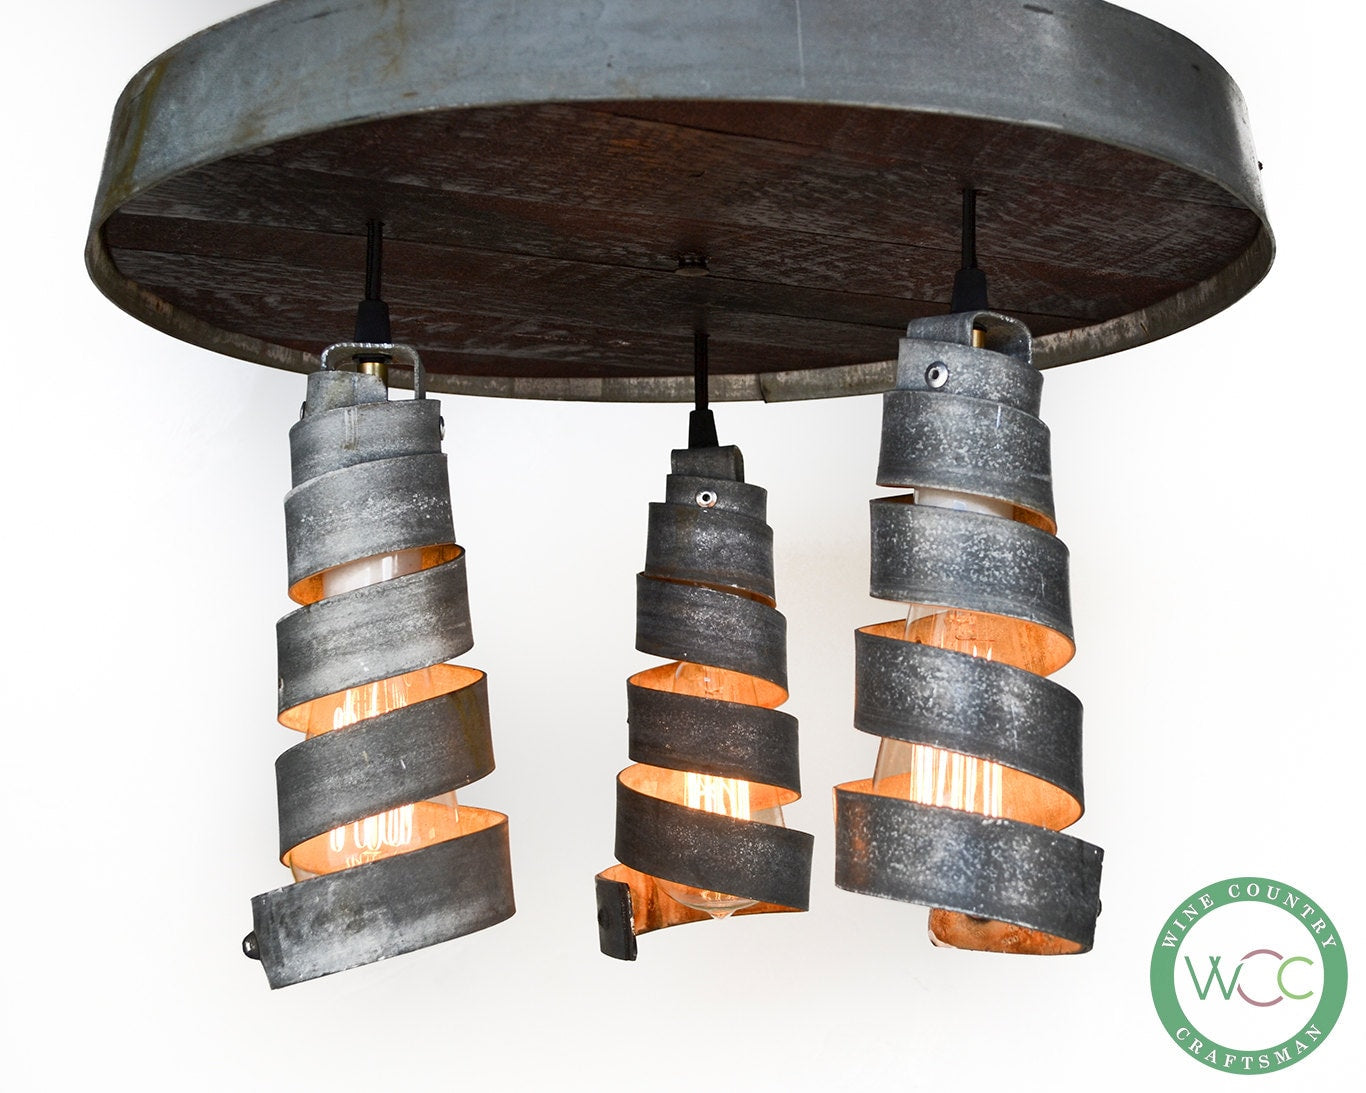 Wine Barrel Head Ceiling Light - Tripoli - Made from retired California wine barrels. 100% Recycled!